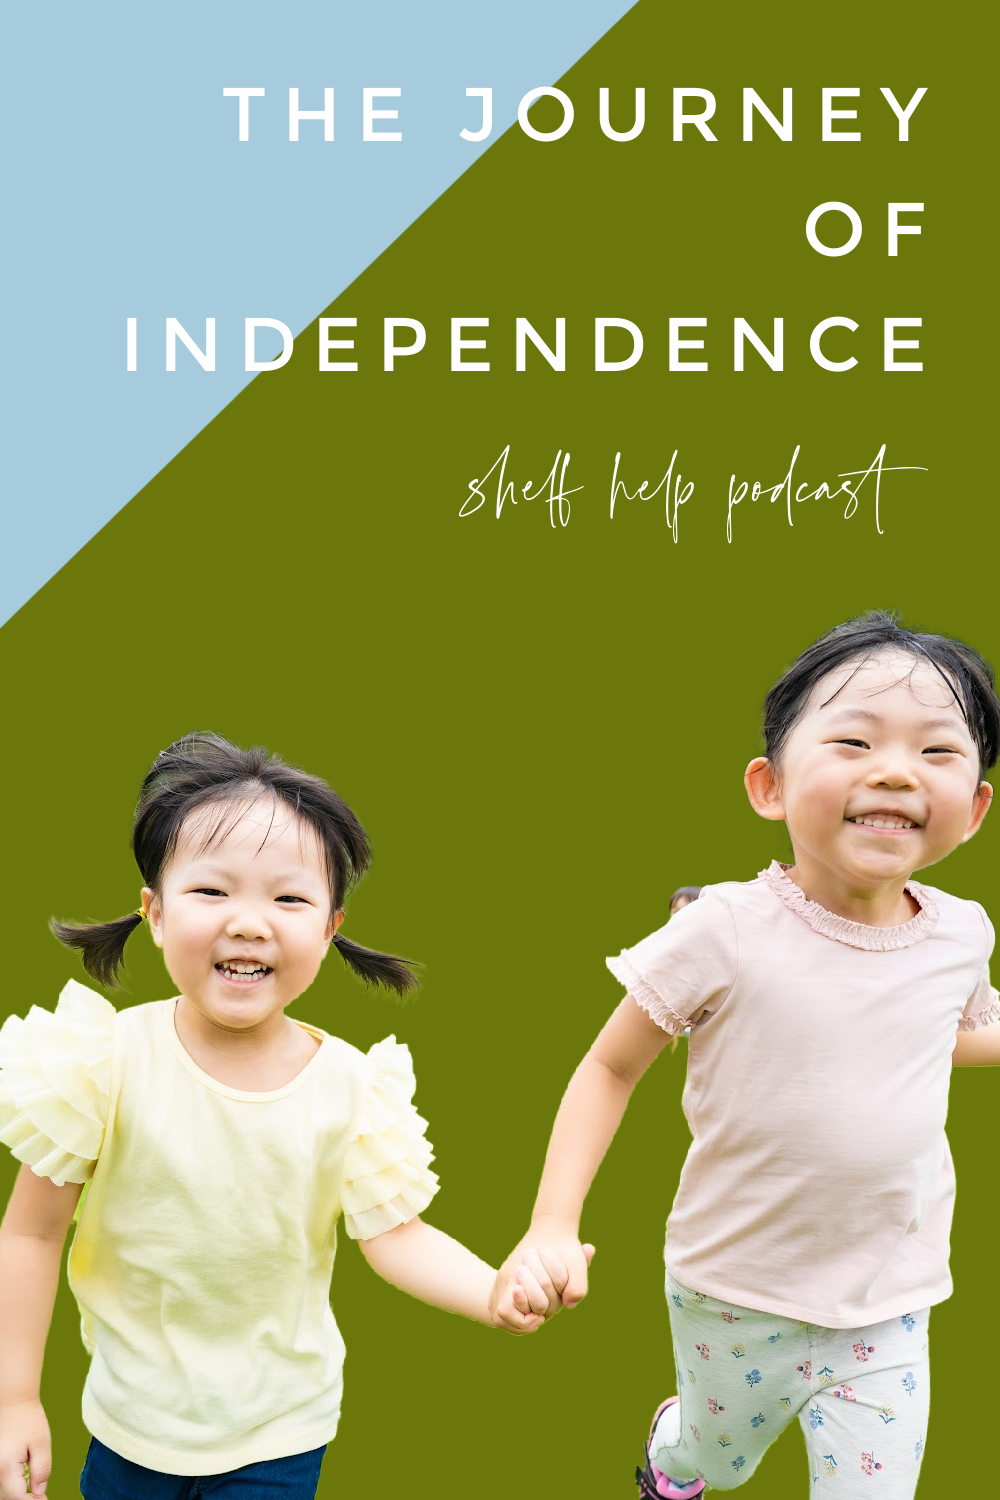 In this Montessori parenting podcast, we discuss the myth that Montessori promotes independence at all costs and instead look at the journey it takes.